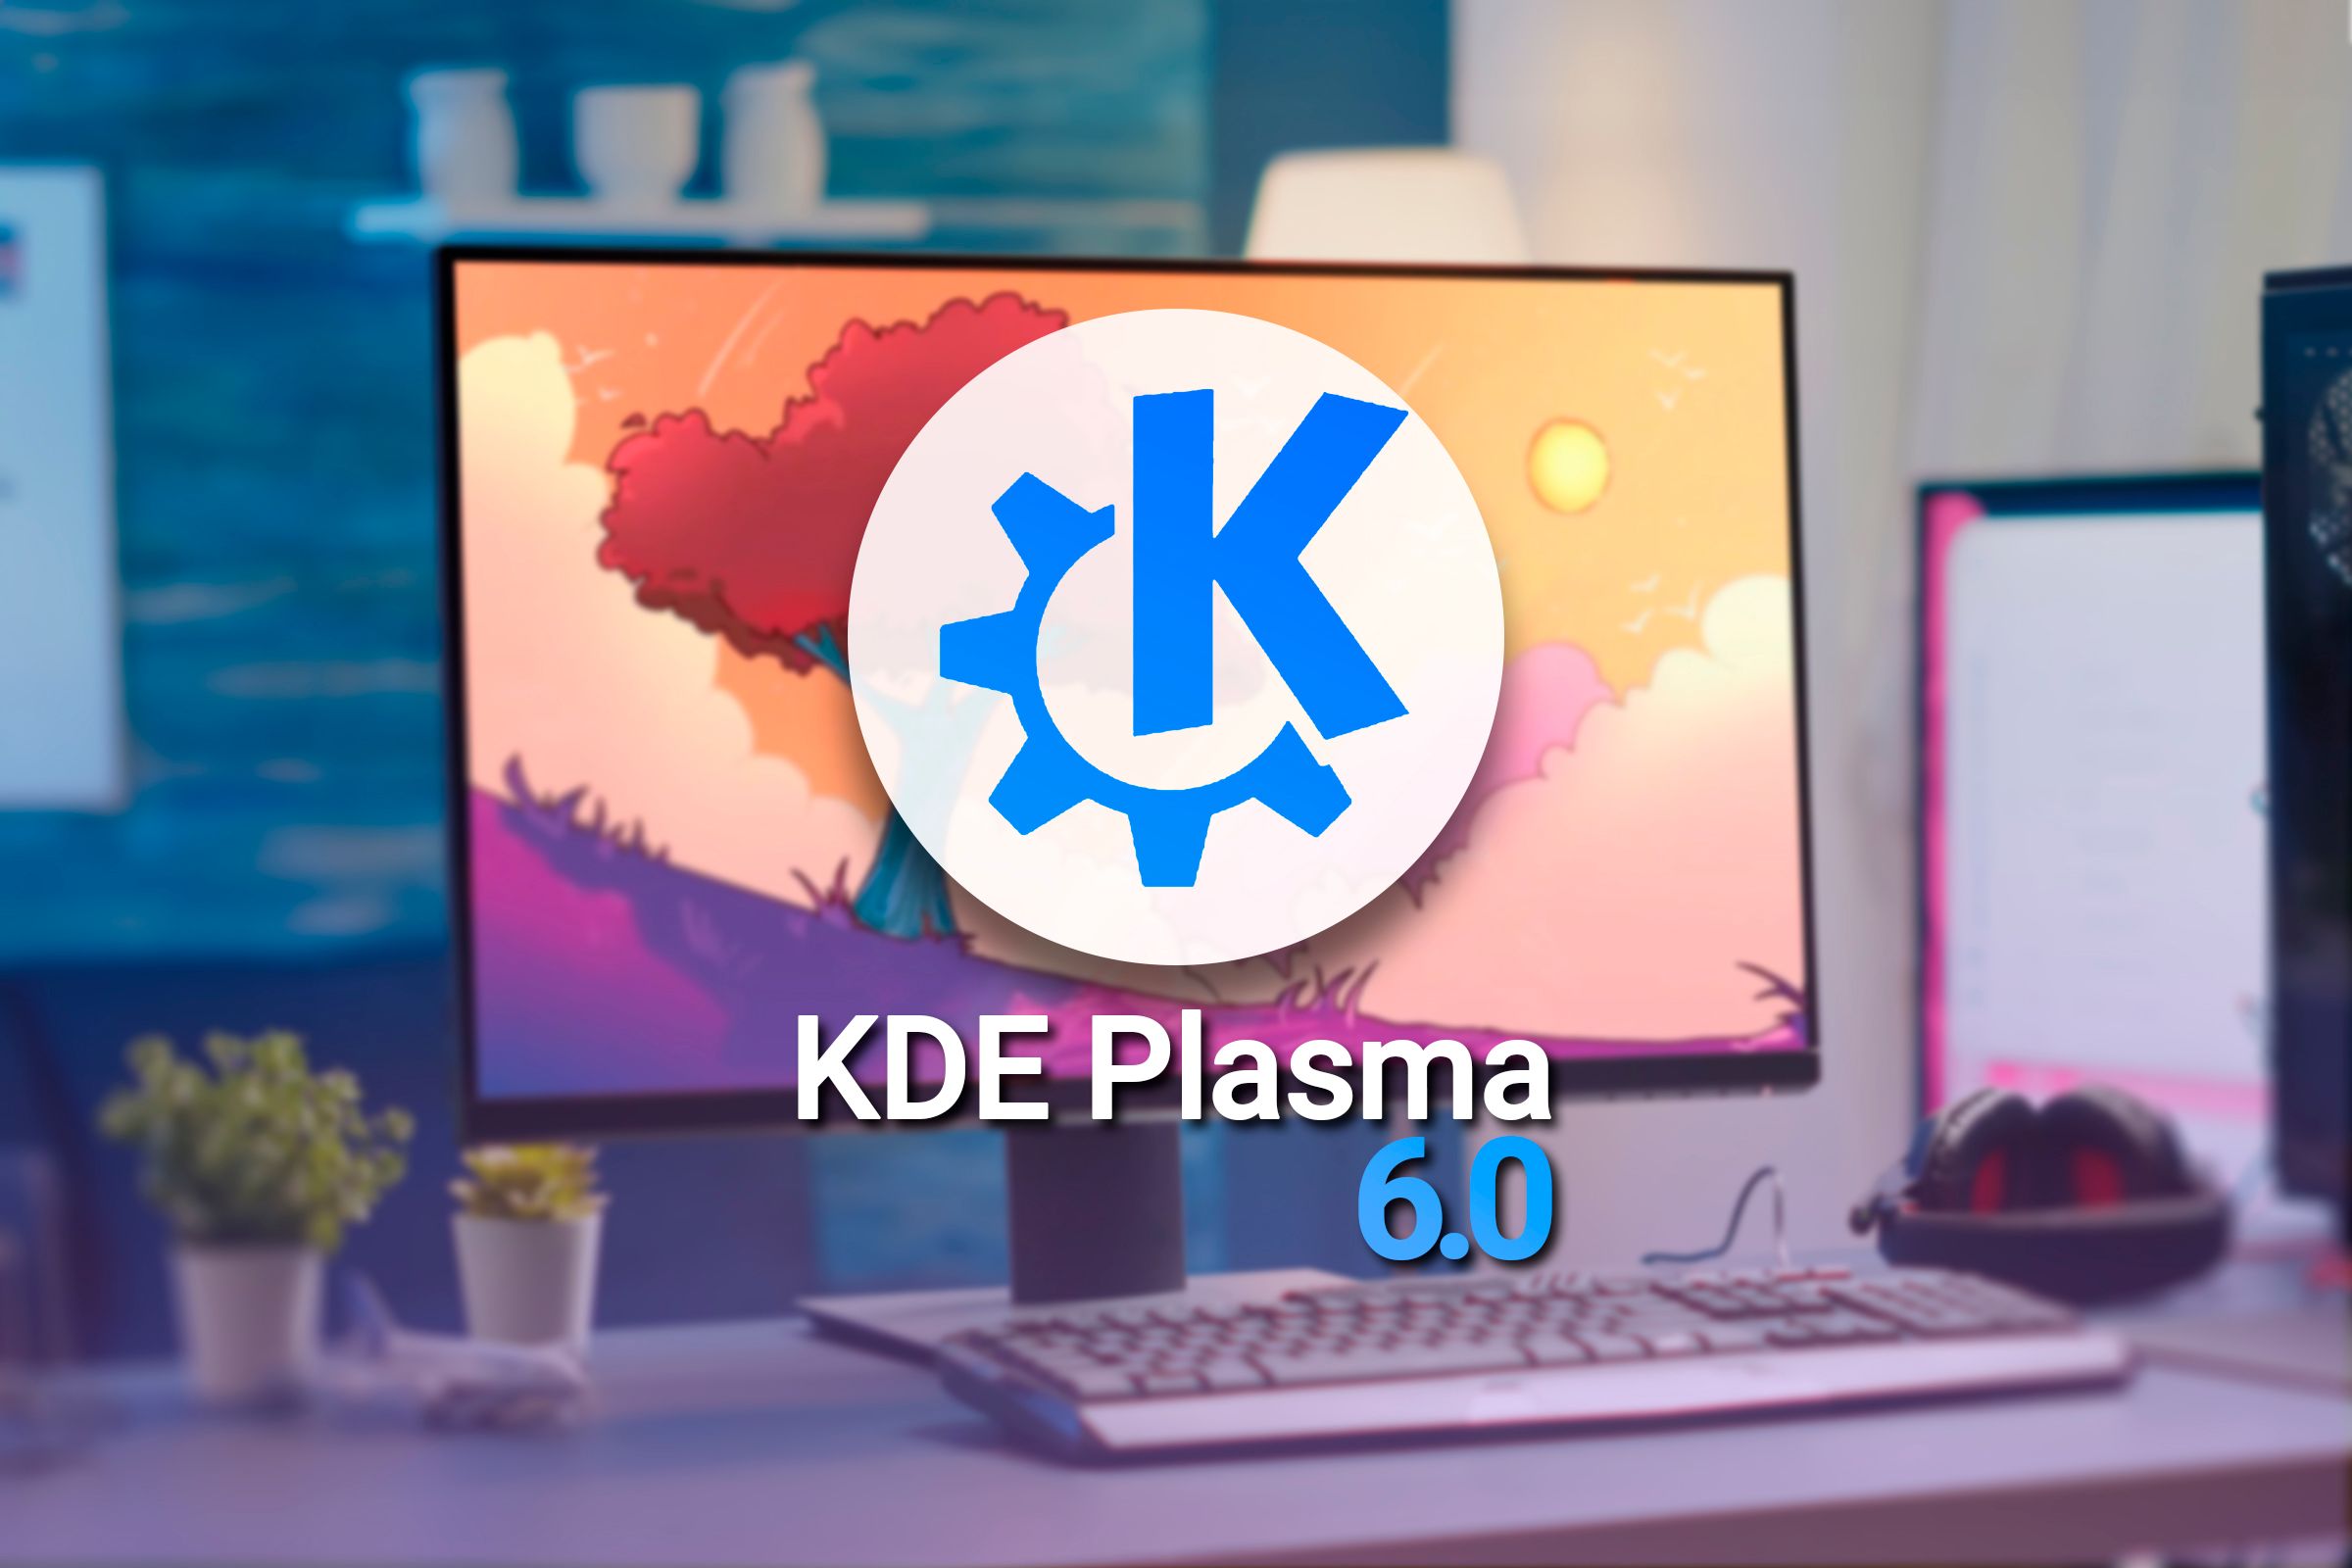 A computer on a desk with the default Plasma 6.0 wallpaper with the KDE icon in front and the word KDE Plasma 6.0 above